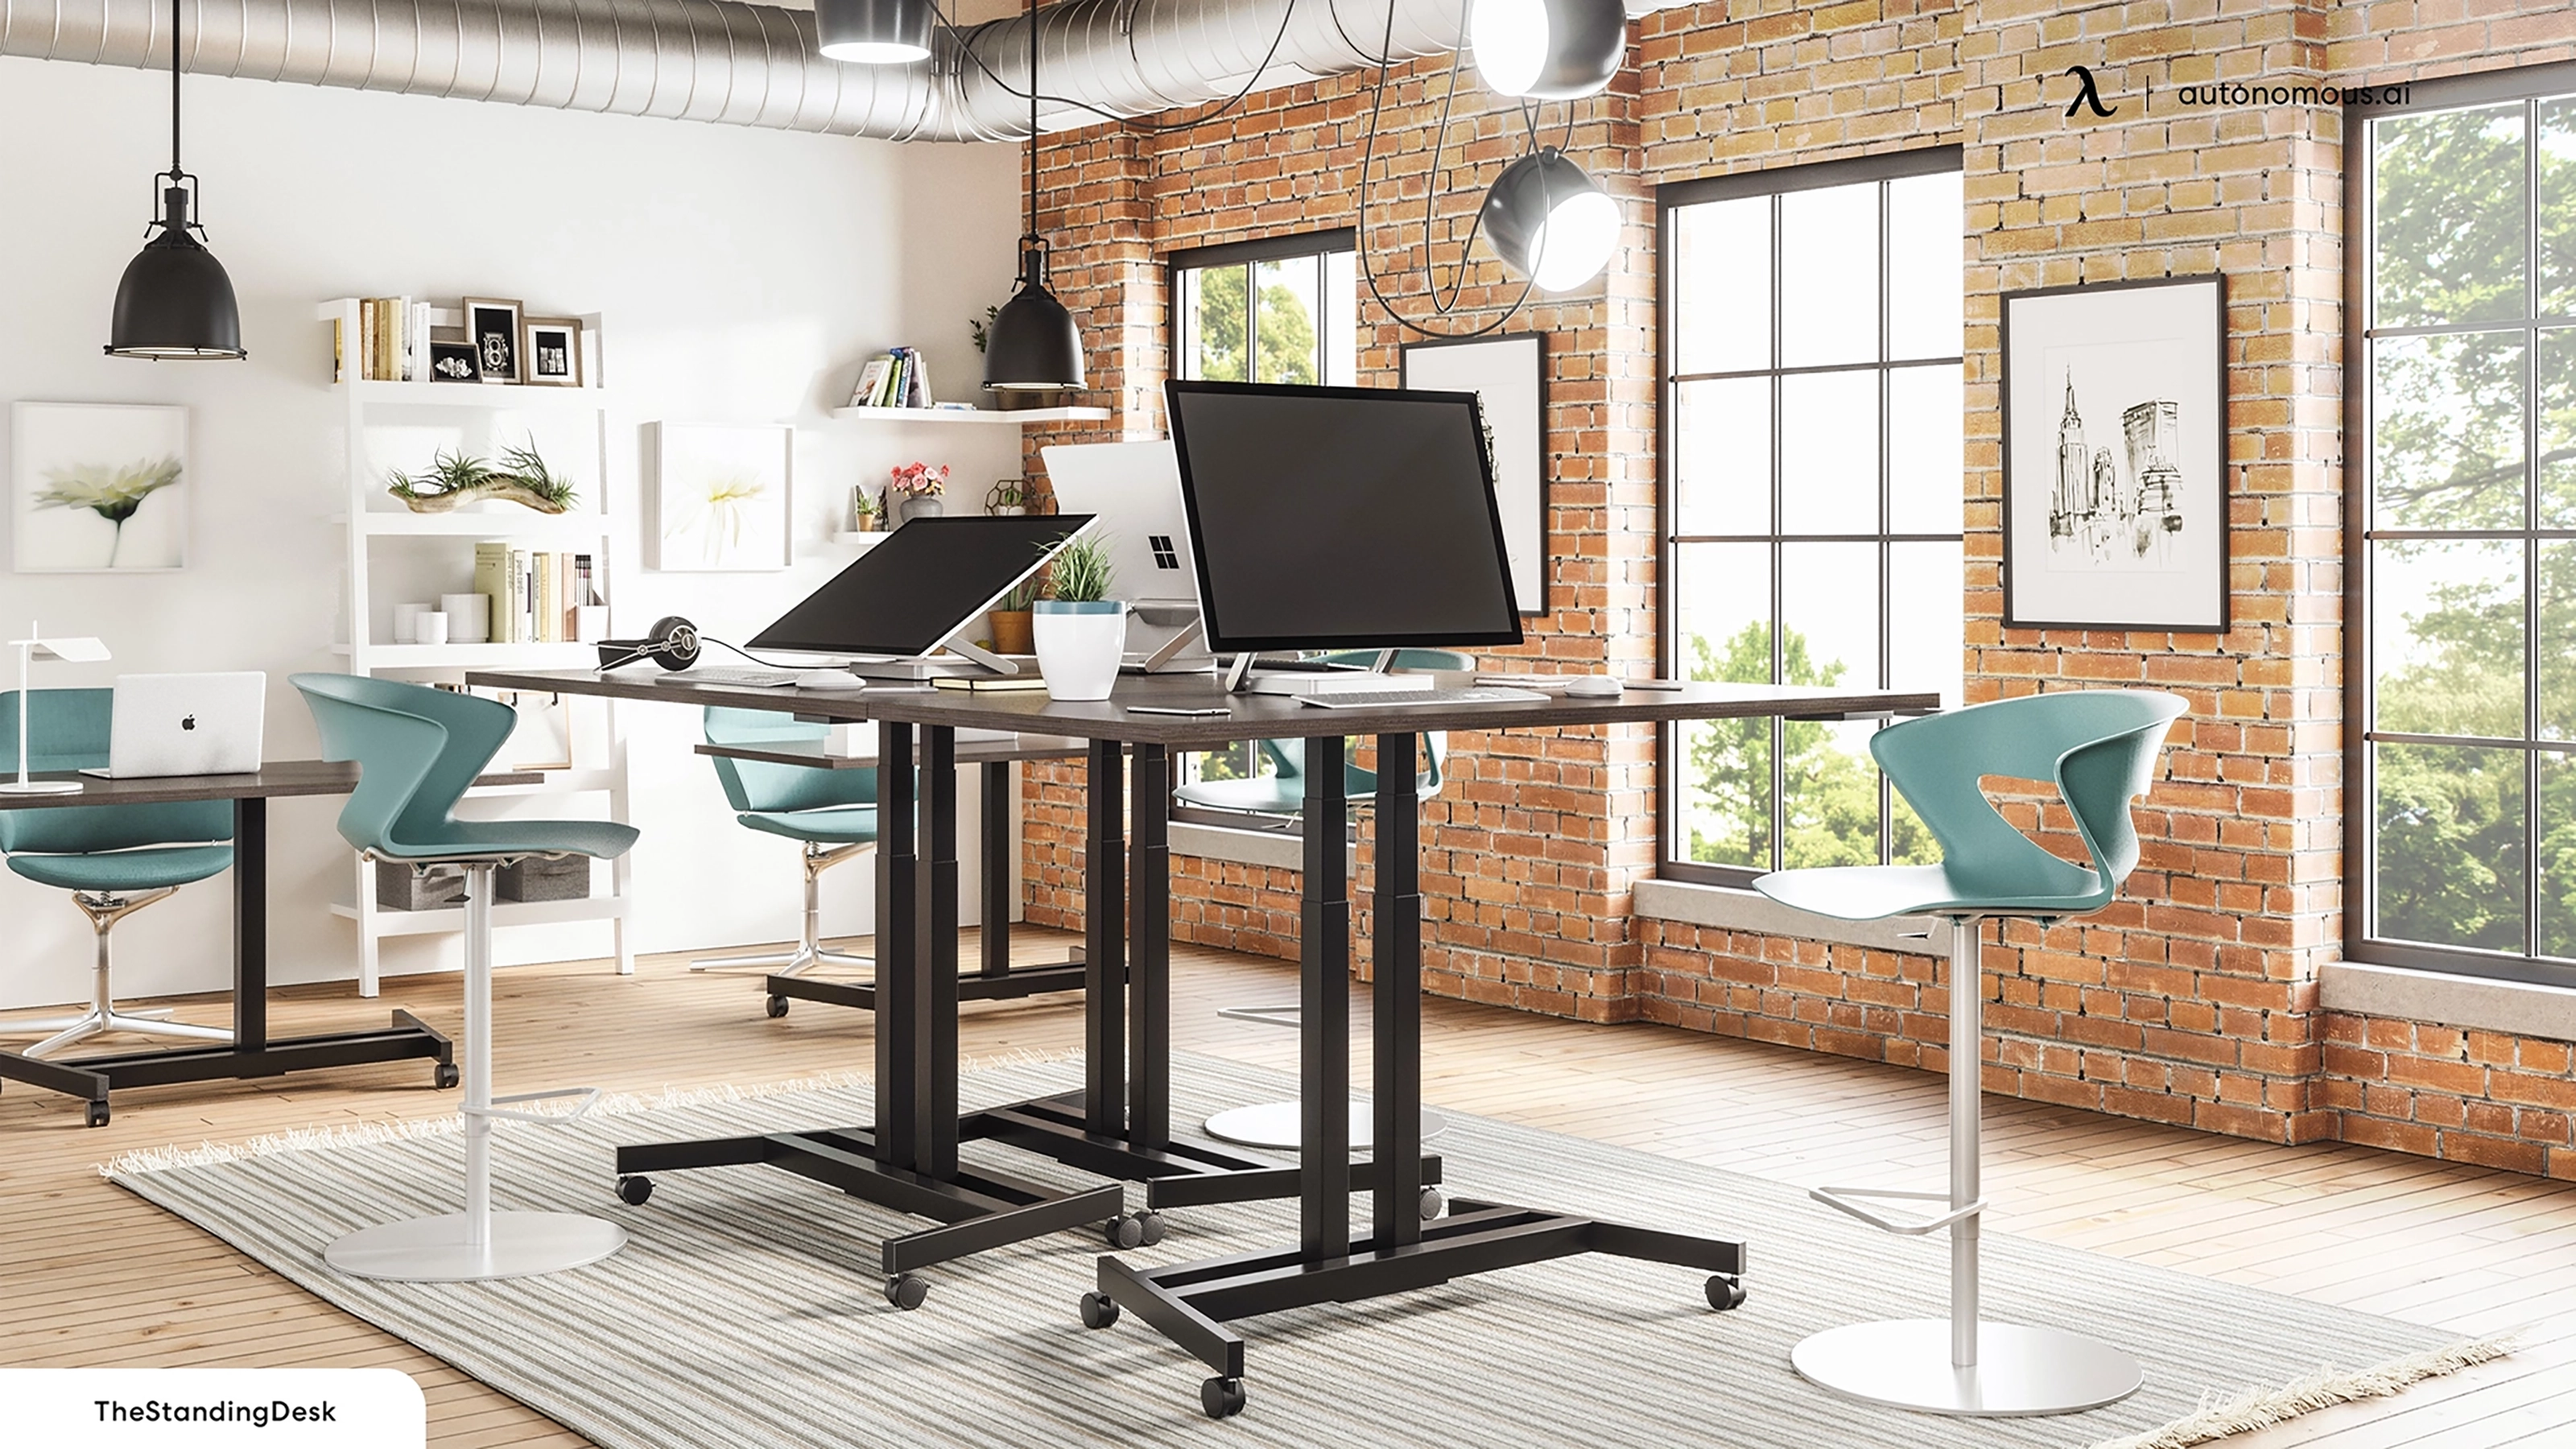 Find The Perfect Office Furnishing: Shop Now and Save Big!